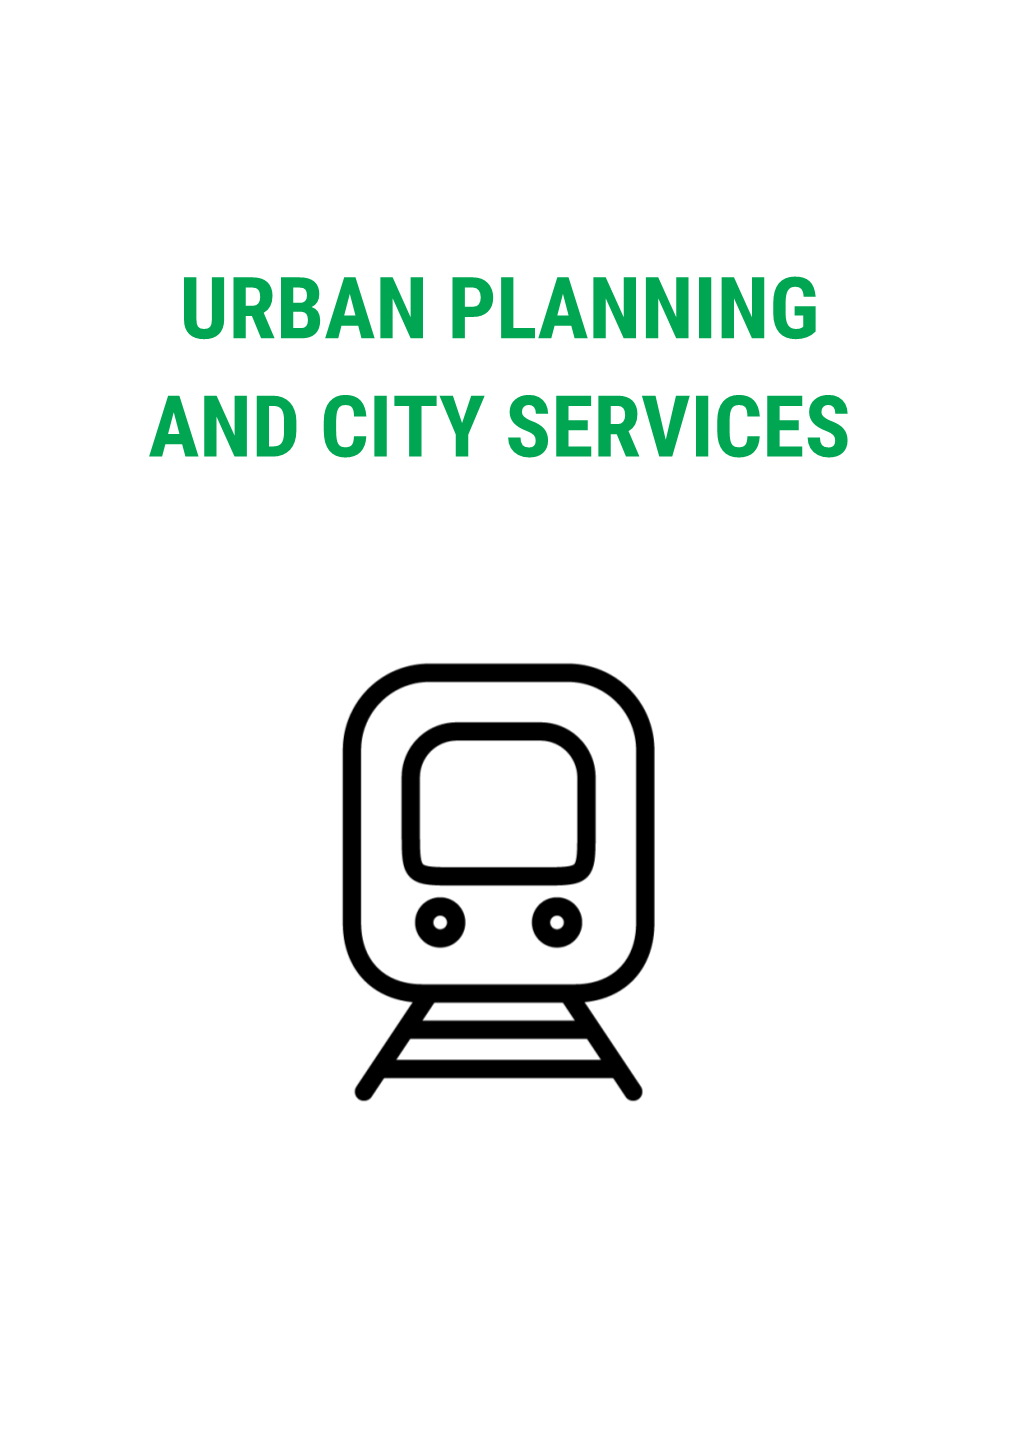 Urban Planning and City Services